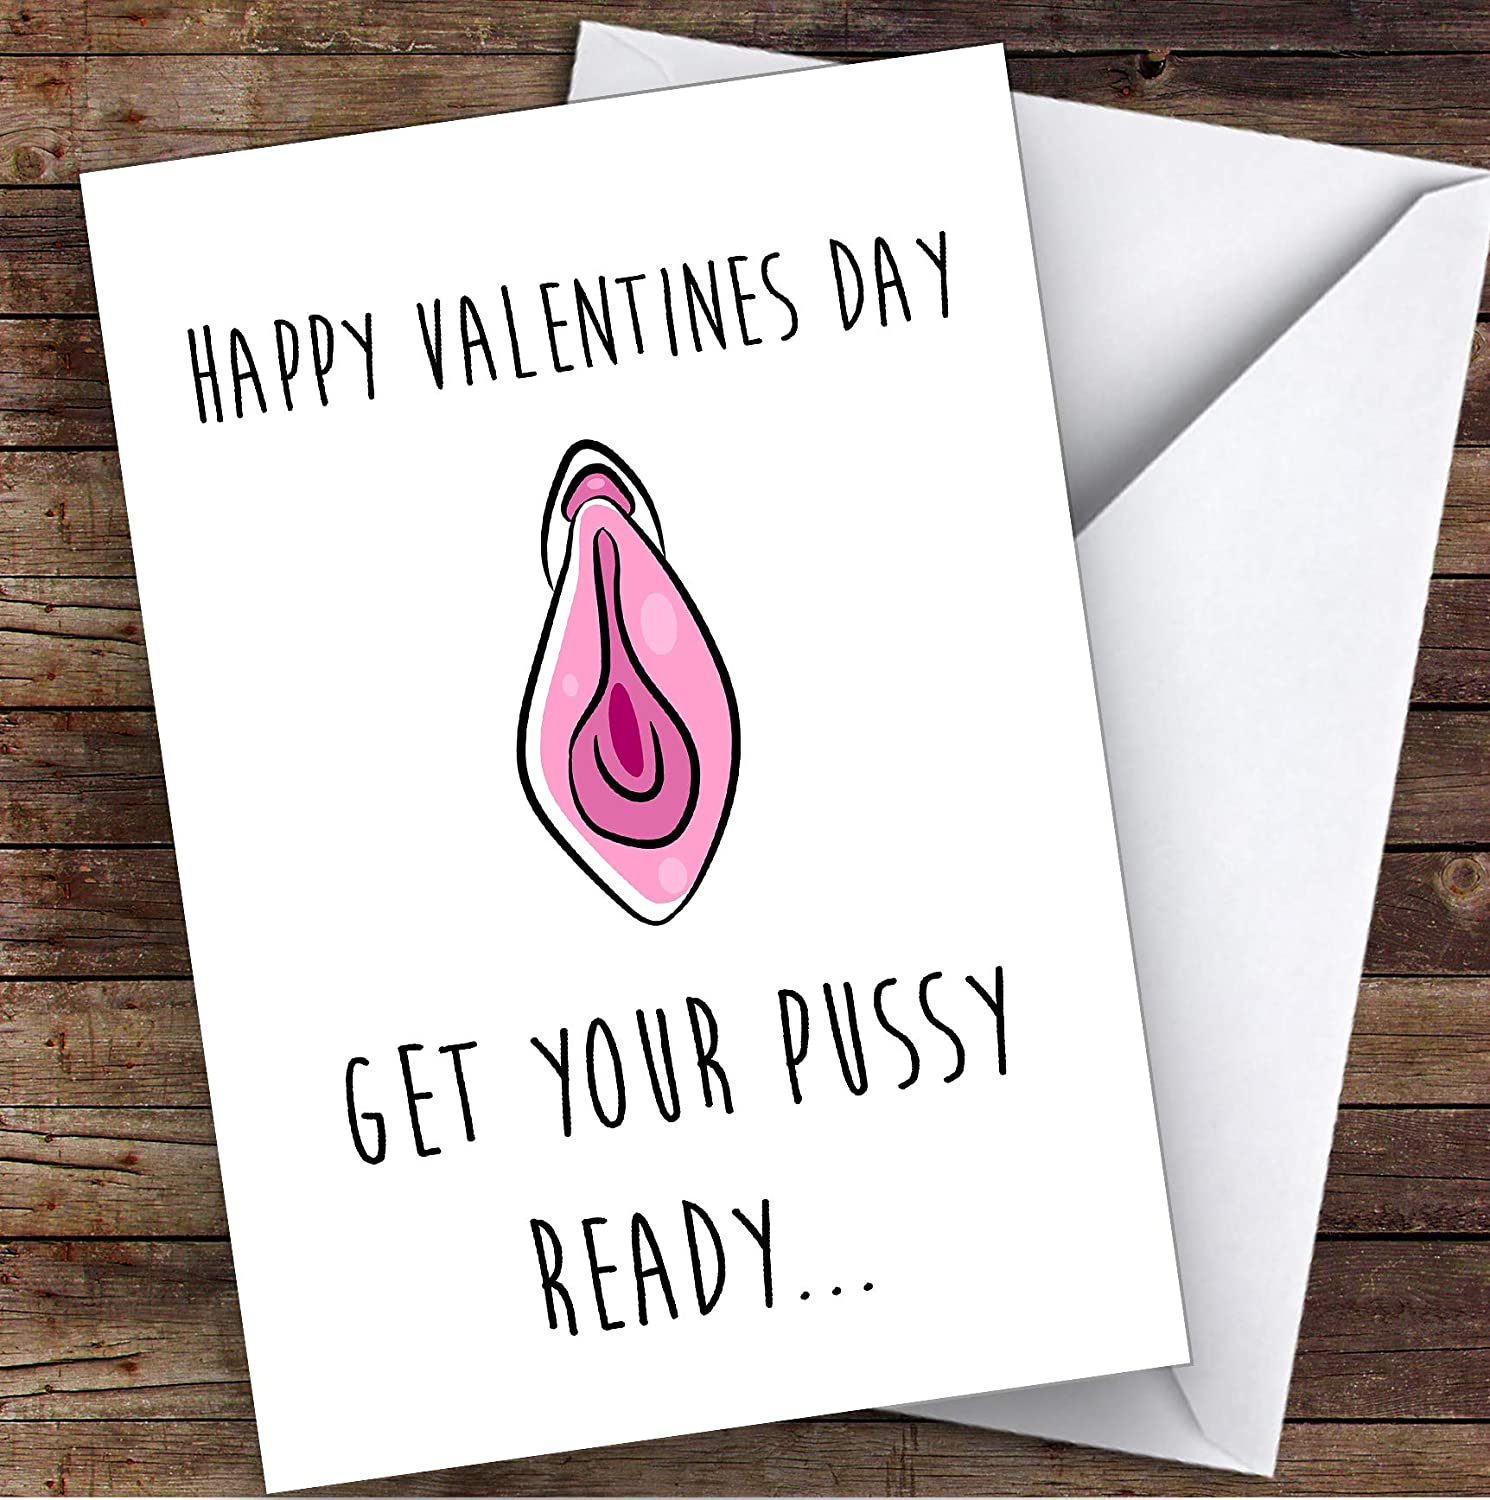 15 Naughty Valentine S And Anniversary Cards For Your Sexy Spouse Rare Festivities of love start early with valentine's week which gives lovers a chance to celebrate this week the whole week long. anniversary cards for your sexy spouse